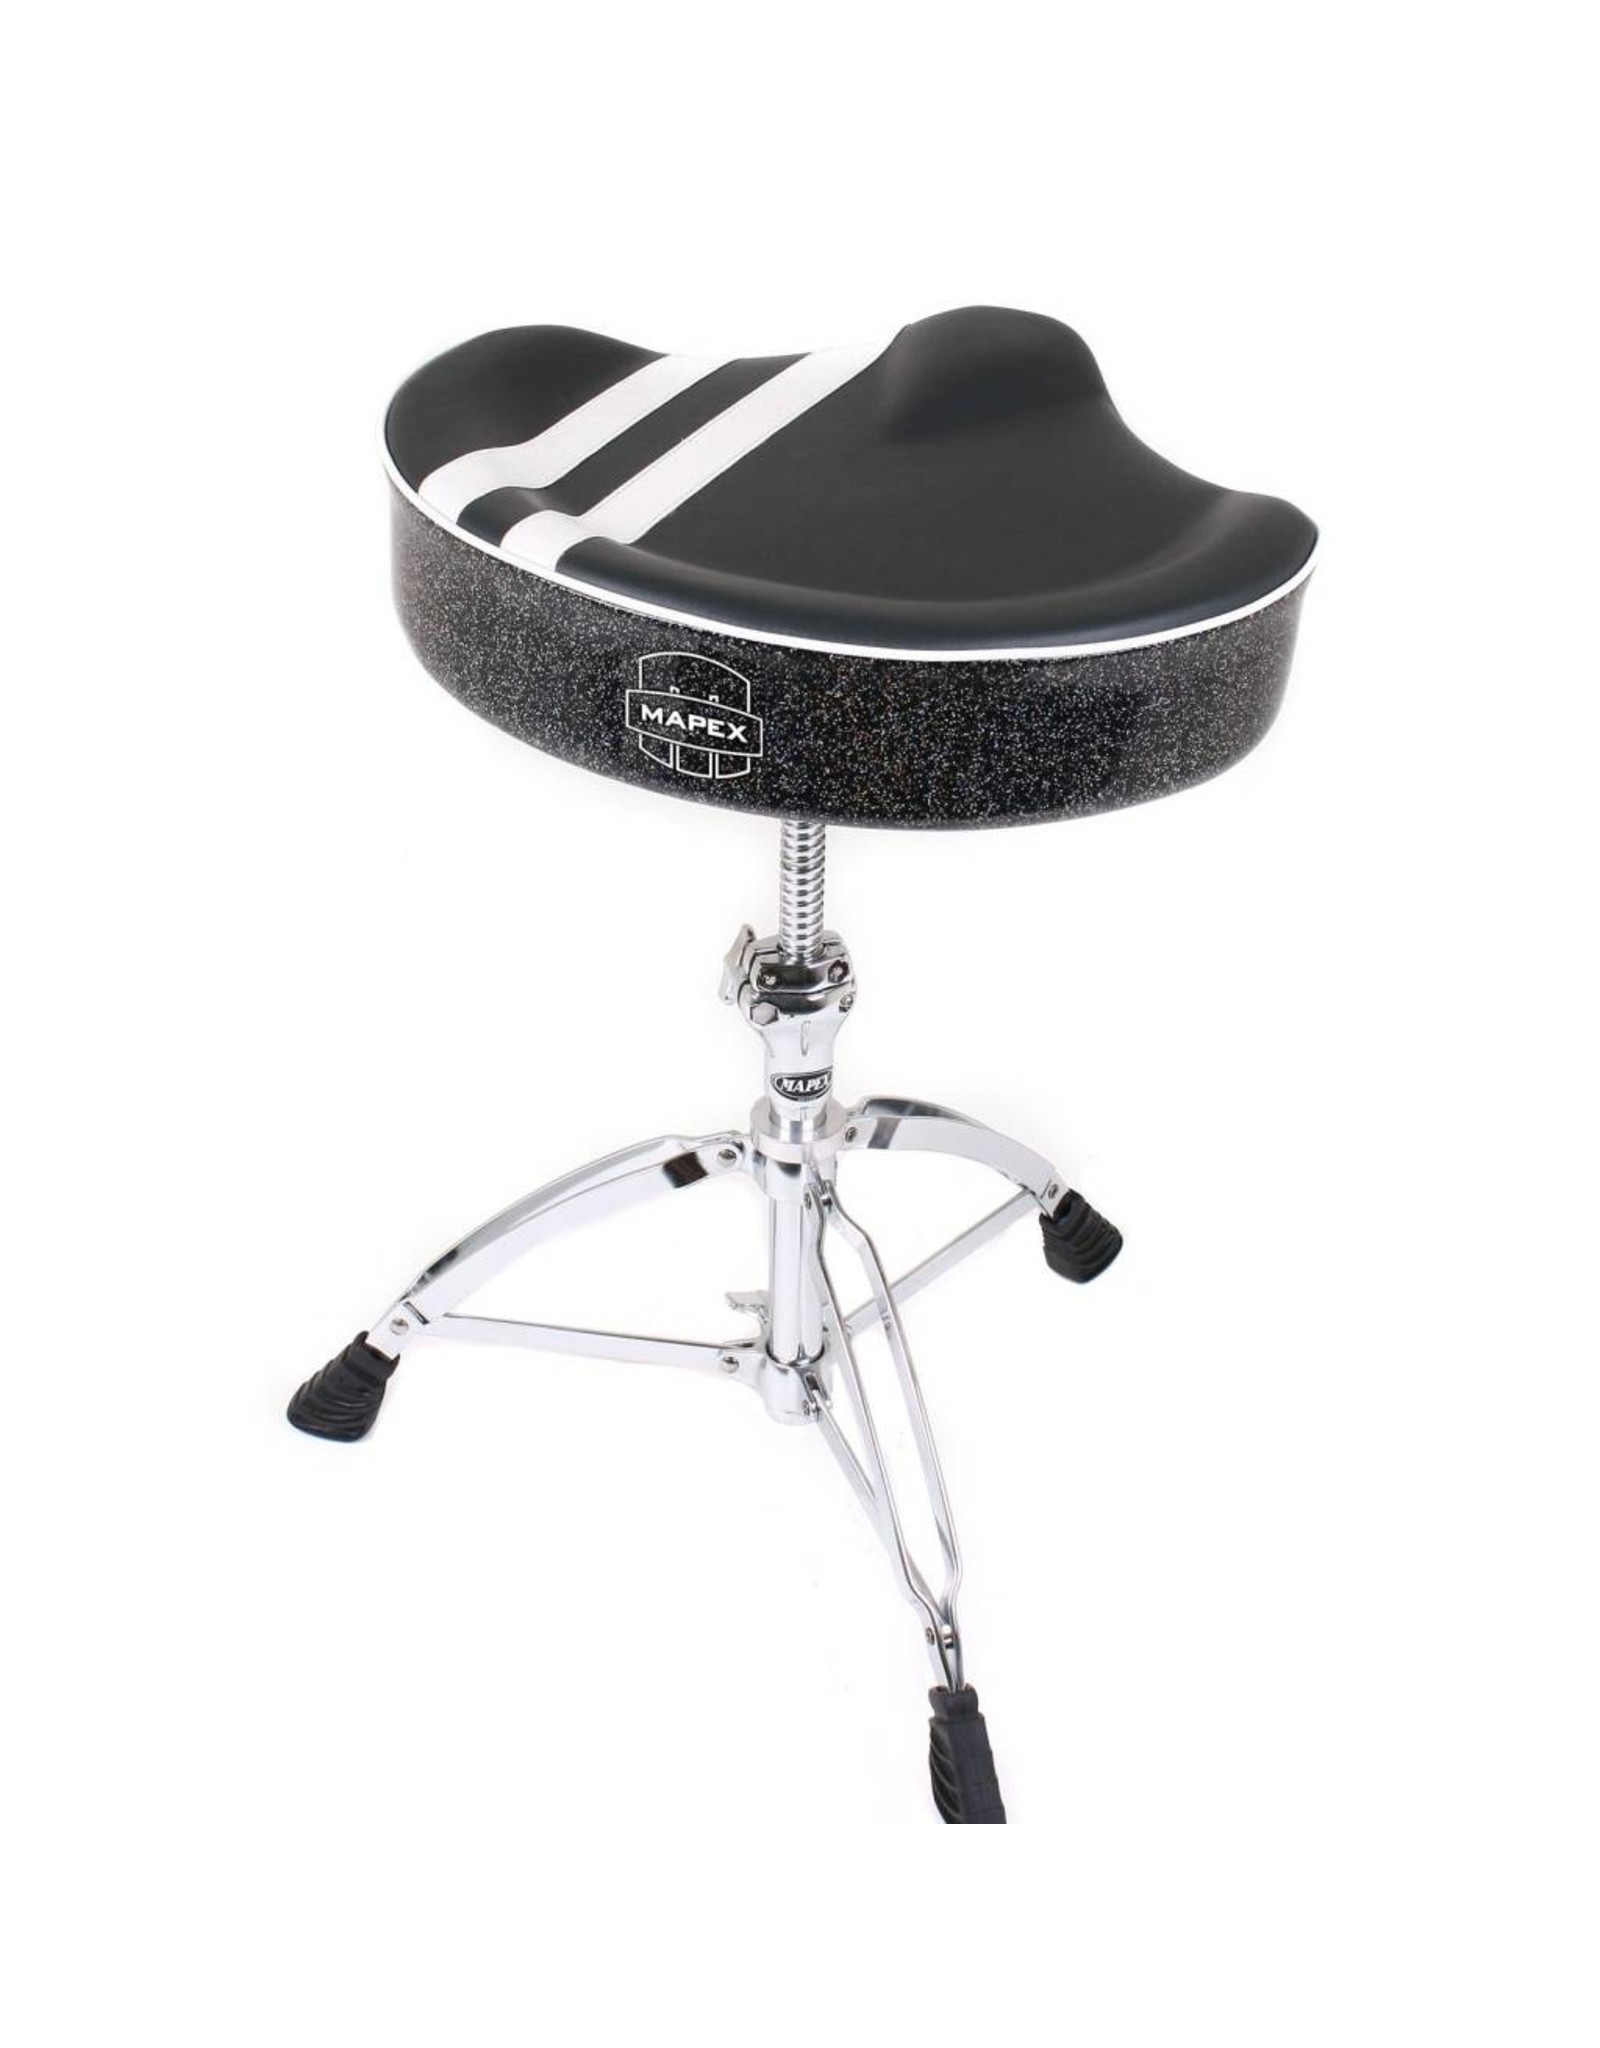 Mapex  T756B Drum Throne Saddle Seat, double-beens